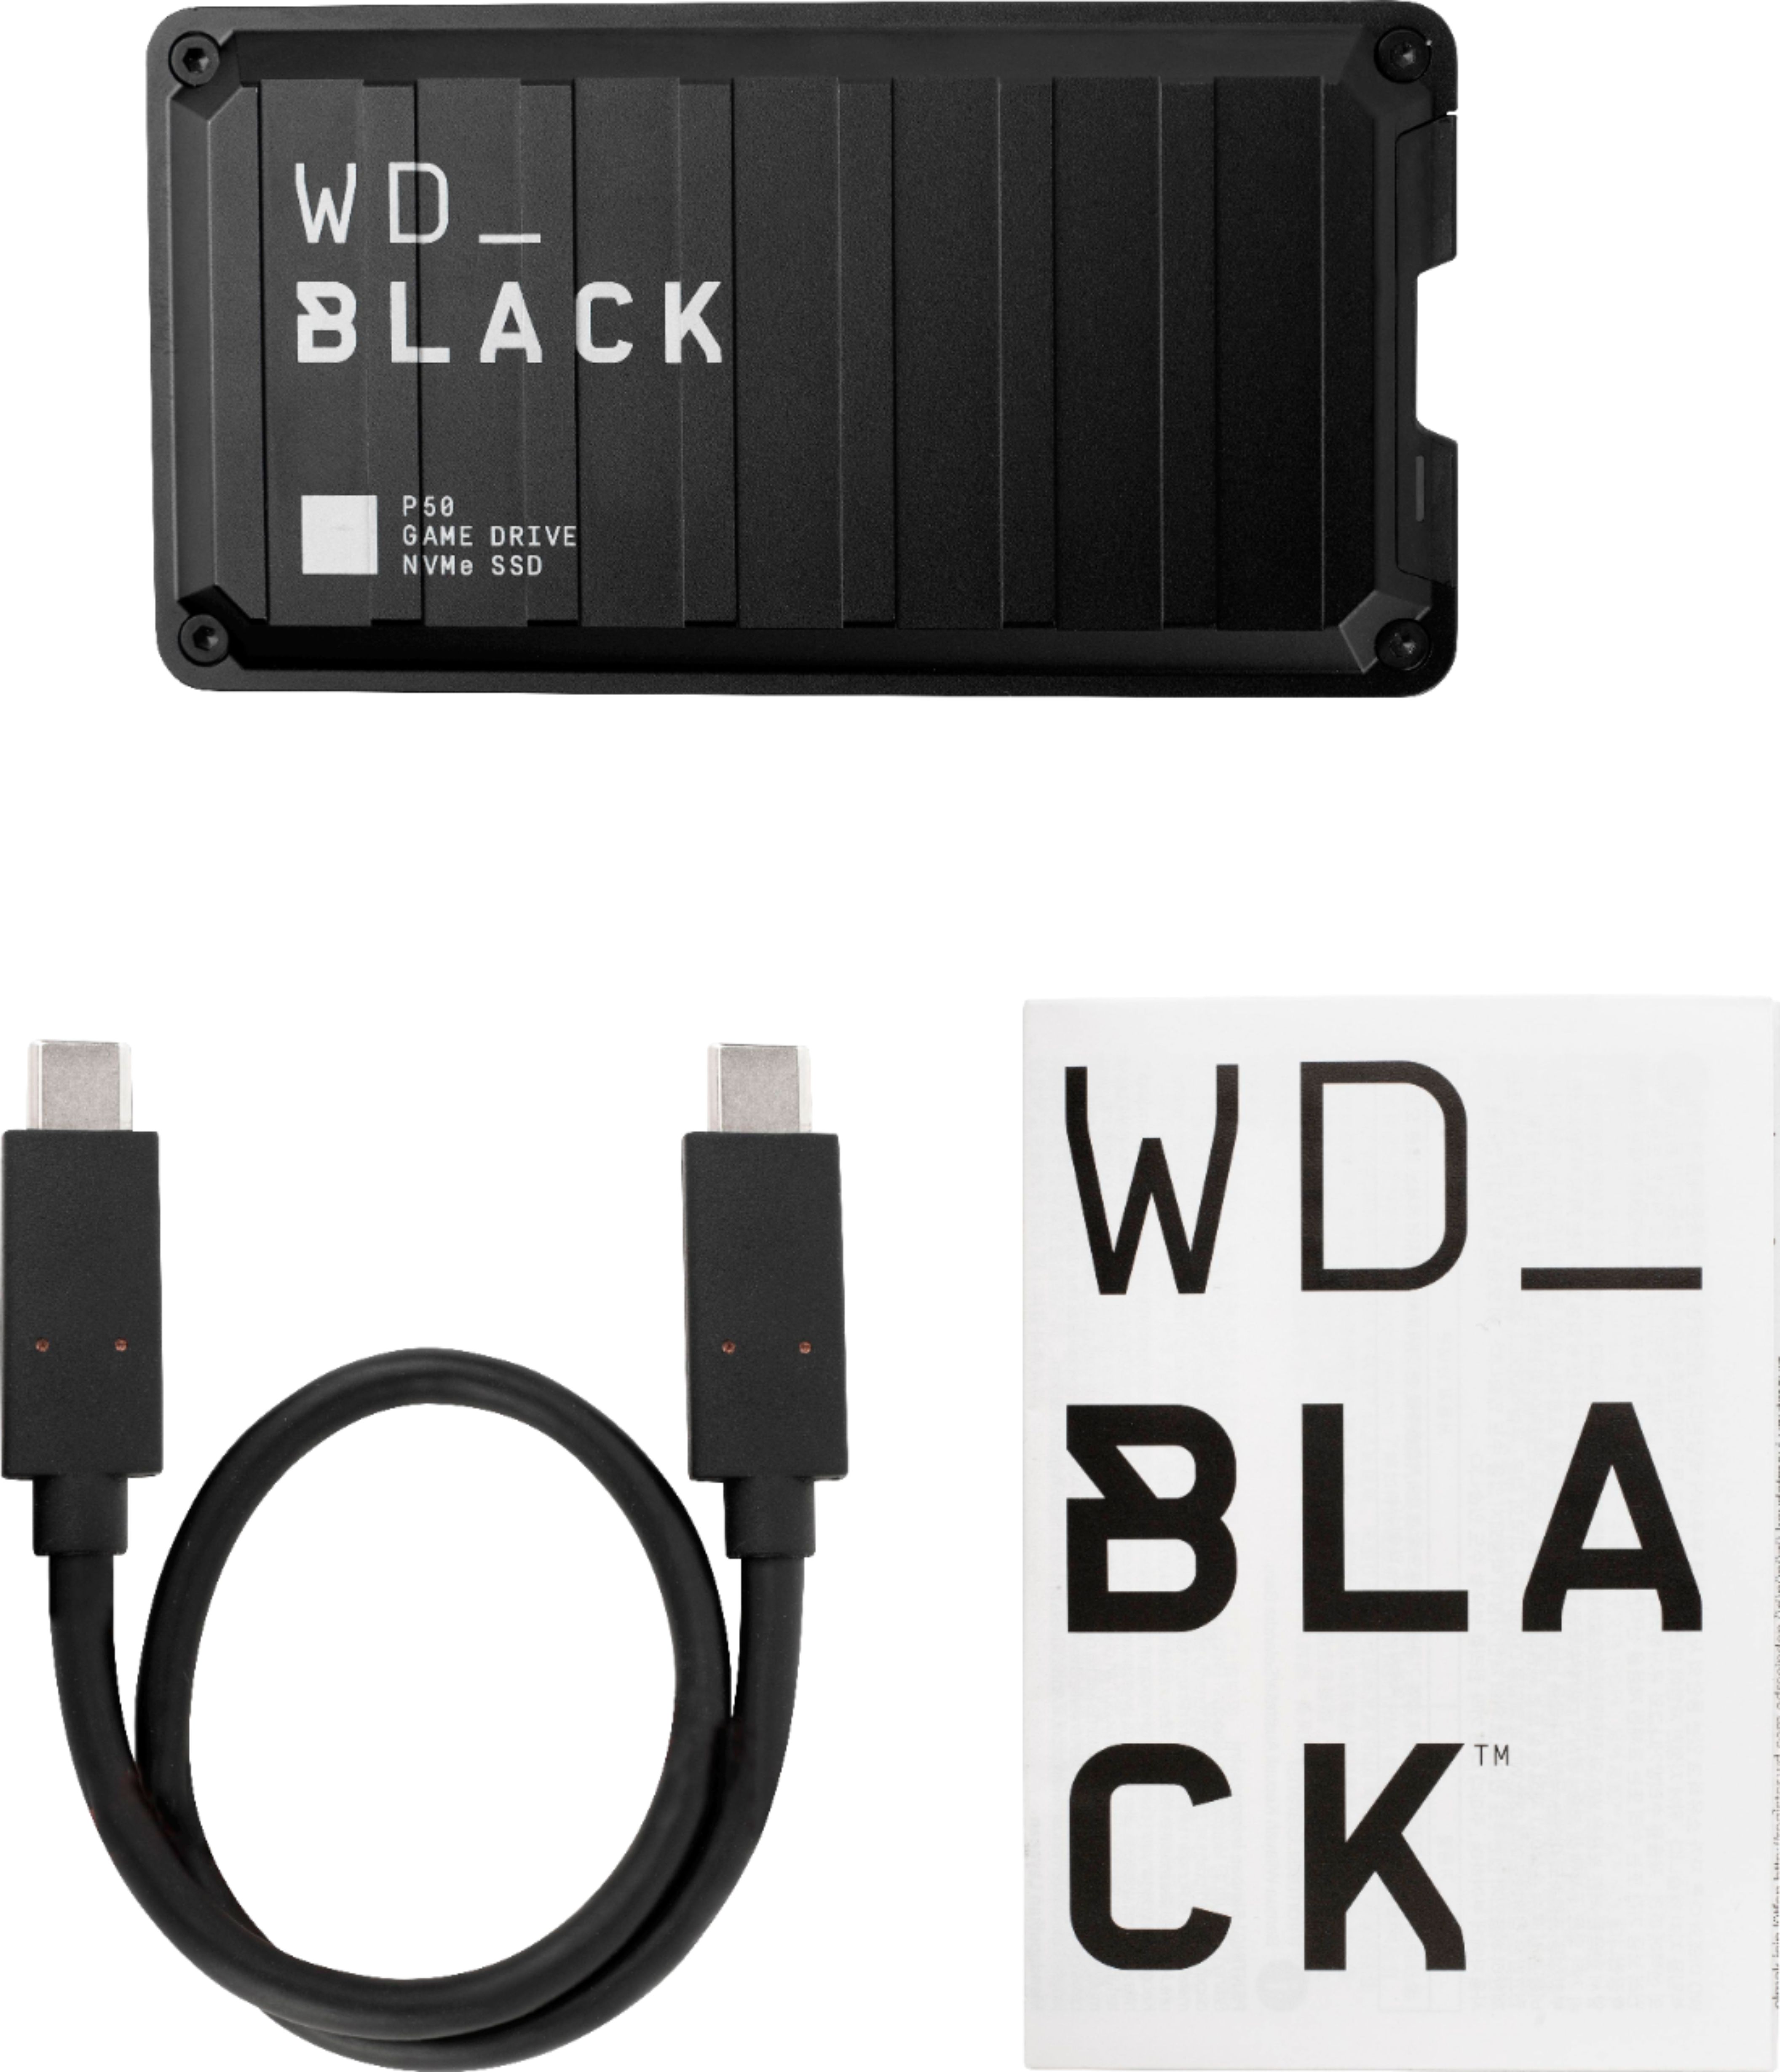 Wd Wd Black P50 1tb Game Drive External Usb 3 2 Gen 2x2 Portable Solid State Drive Black Wdba3s0010bbk Wesn Best Buy